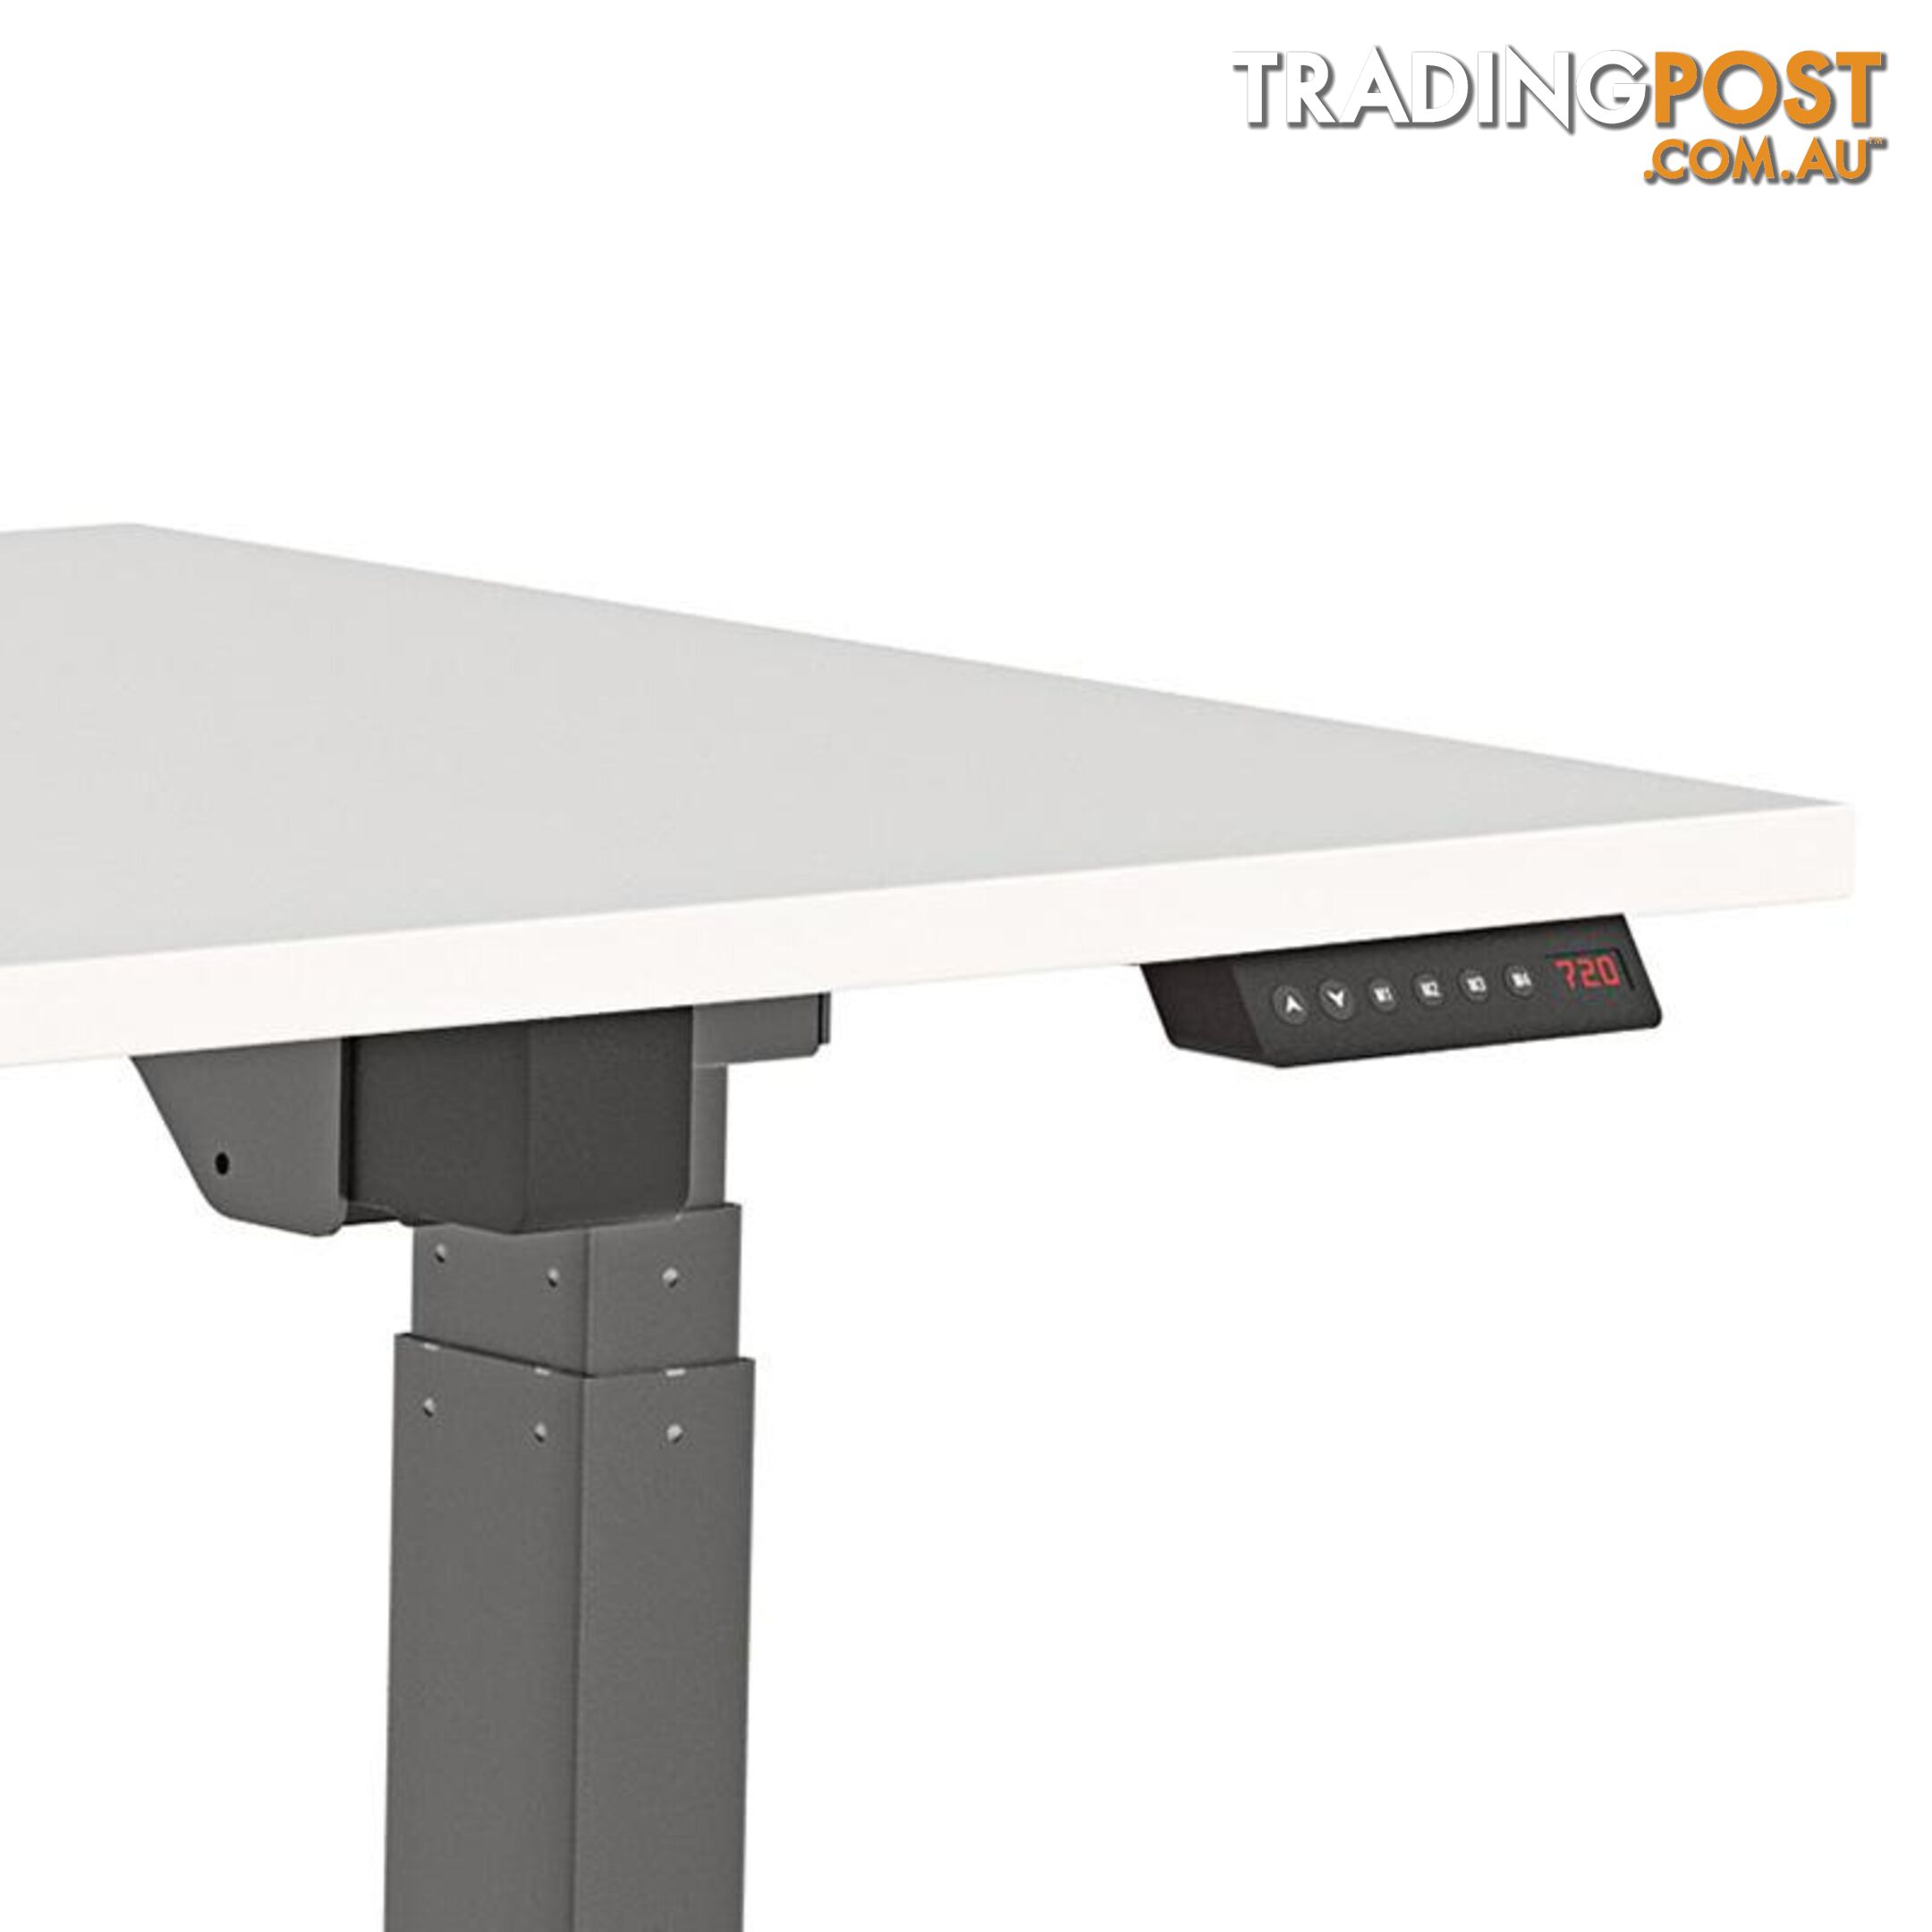 AGILE PRO Electric 2 Column Sit Standing Desk - 1200mm to 1800mm - White & White - OG_AGE2SSD139